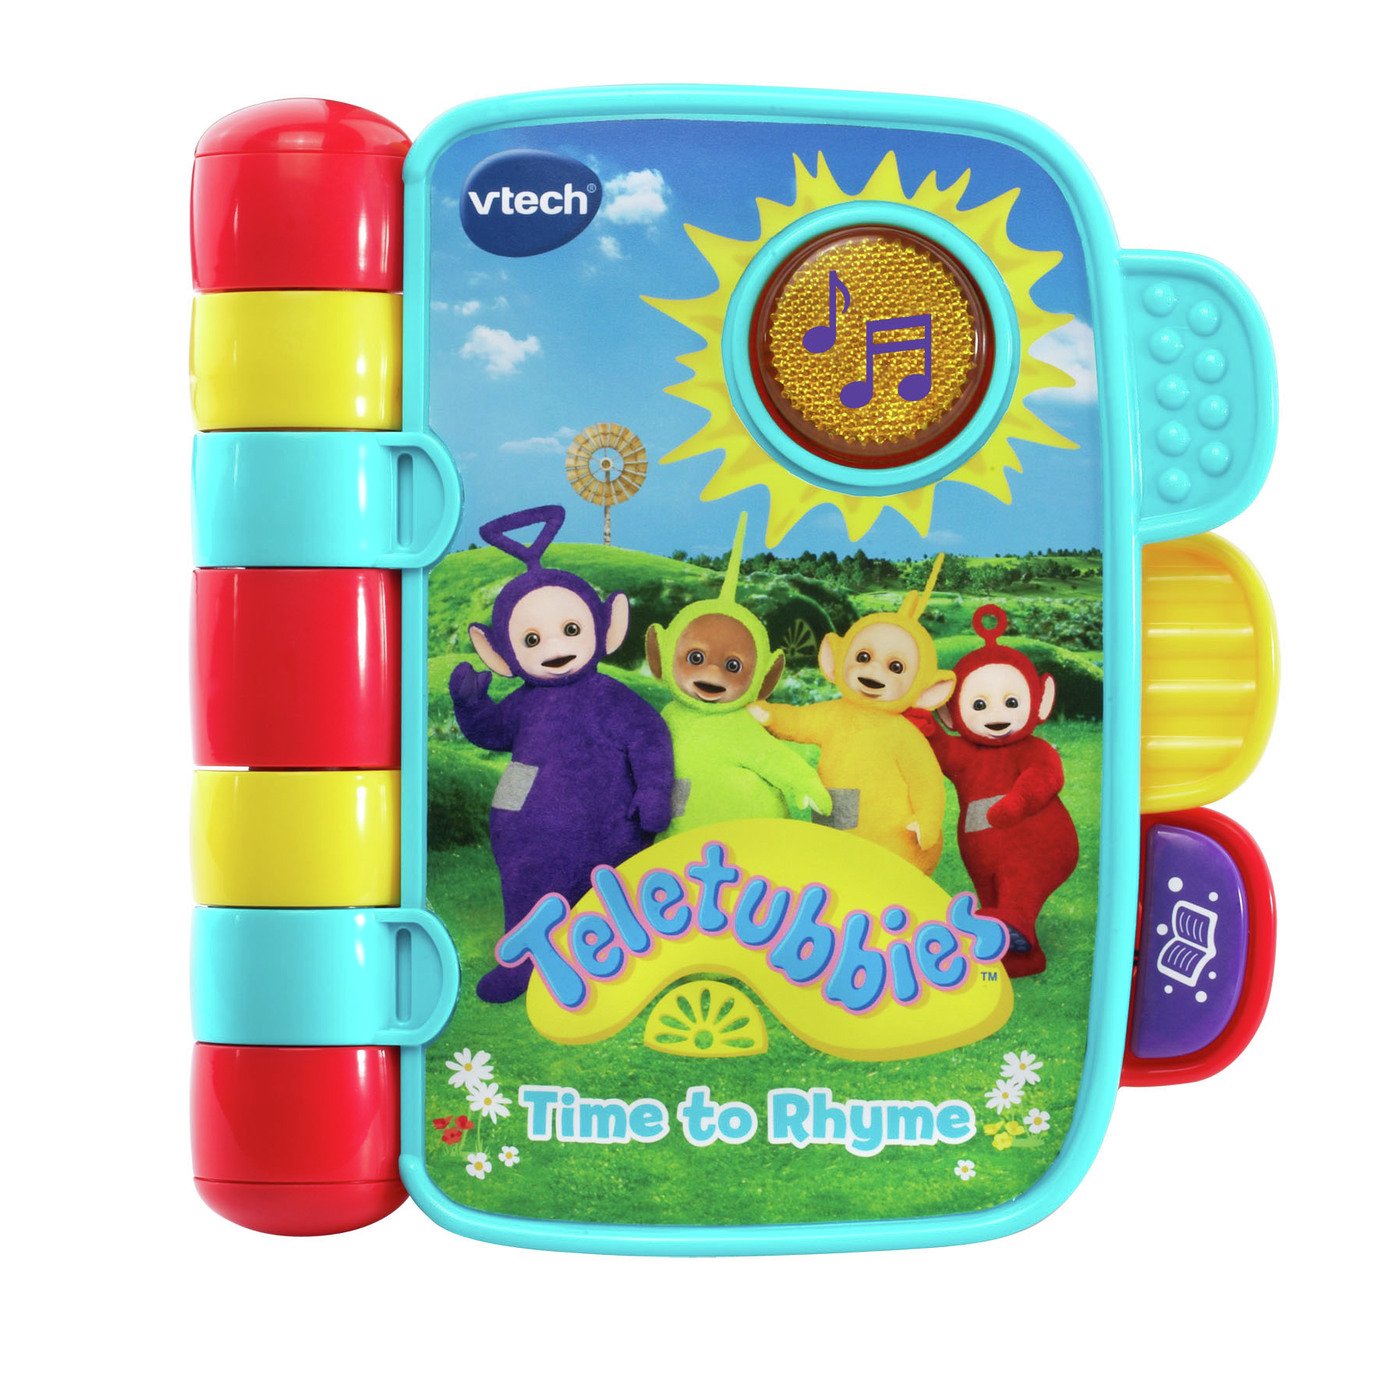 VTech Teletubbies Time to Rhyme Book